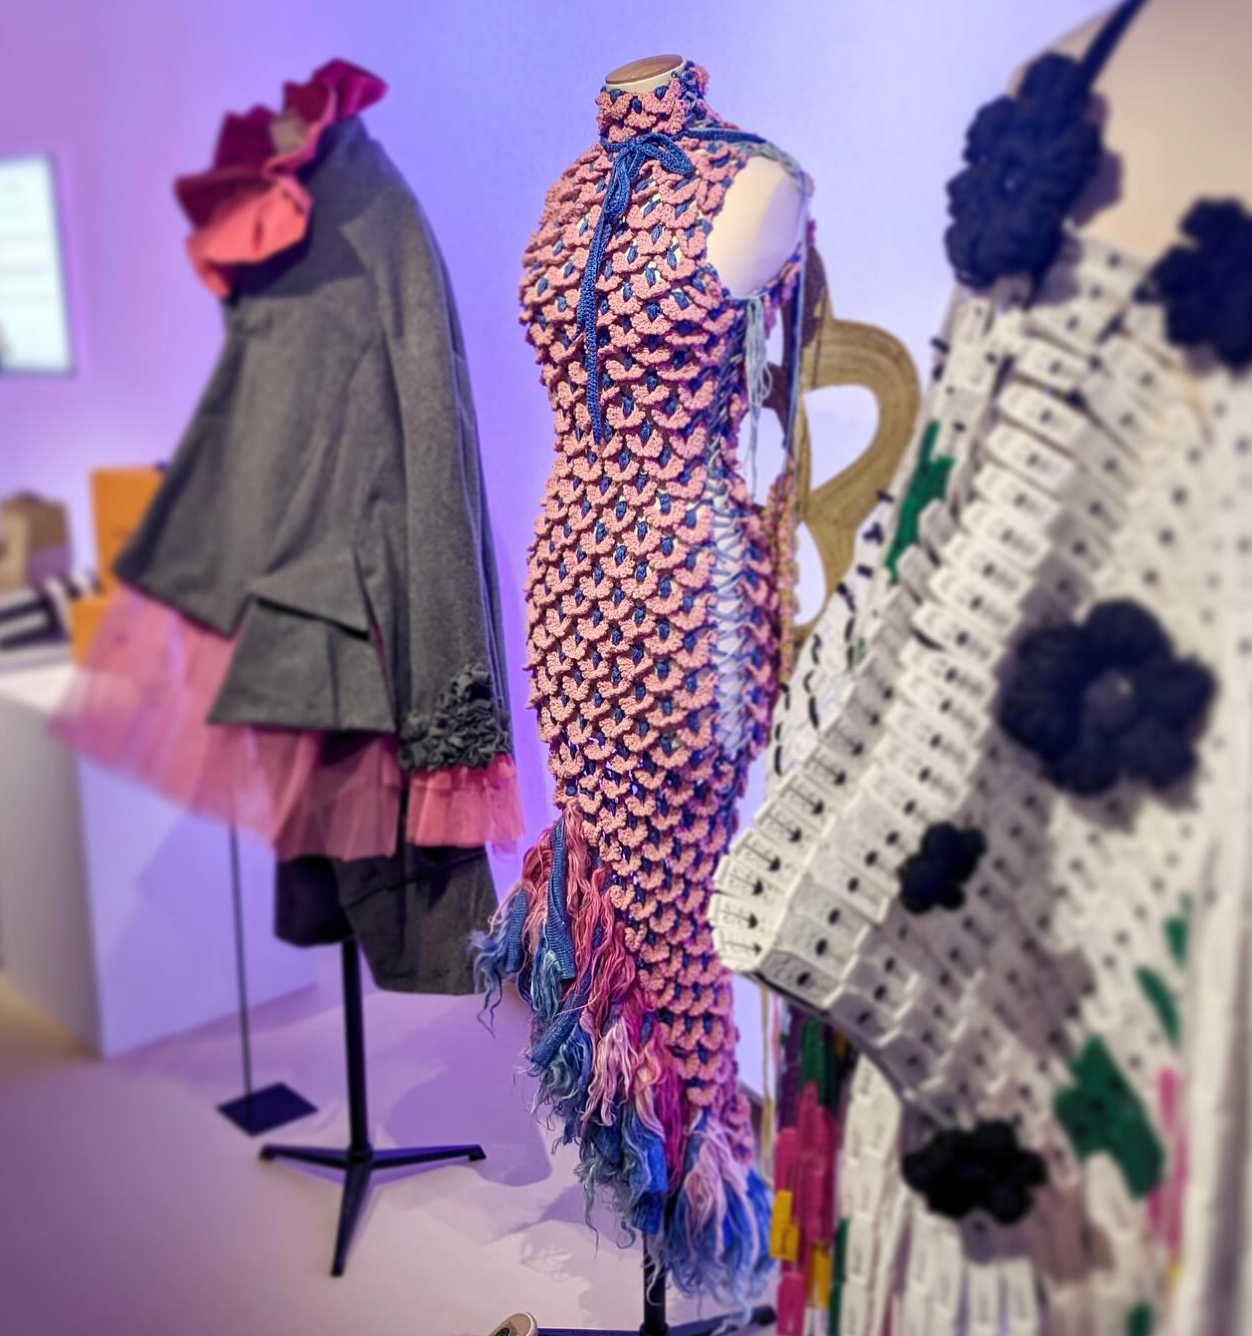 Look 1, LA ZARZAMORA from REGENERATIVE FOLKLORE, showcased at LVMH’s LIFE 360 Summit at UNESCO. Pink and purple crochet dress using signature ACIEN coronation crochet textile, made from pineapple yarn with pink and purple fur detail at the bottom.